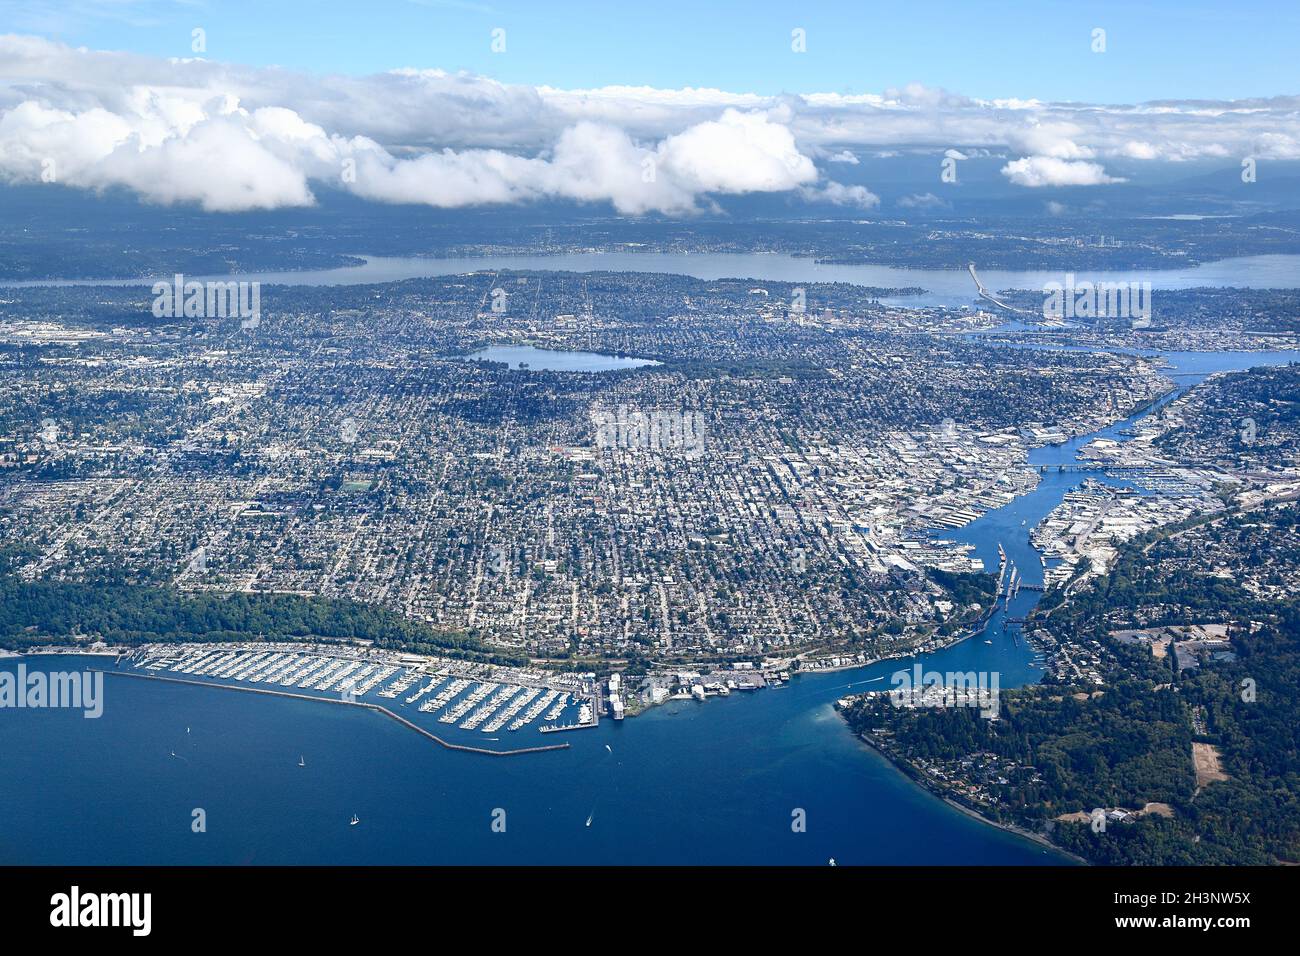 Aerial View of the waterfront just north of Downtown Seattle showing Shilshole bay and Lake Washington Ship Canal. Stock Photo